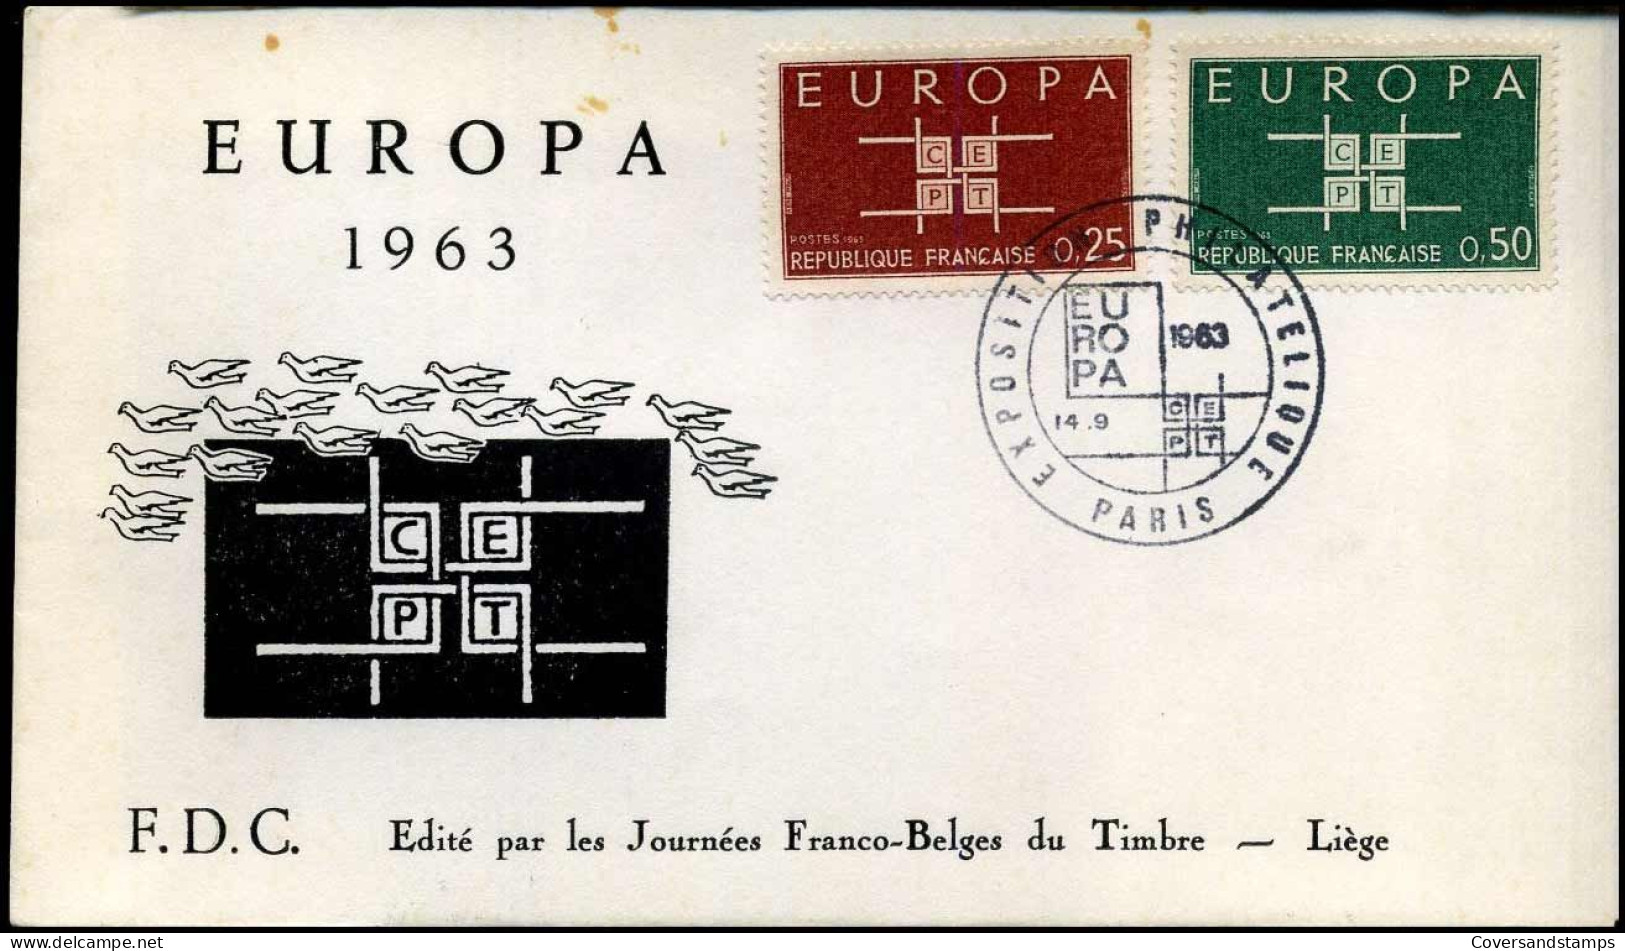 France - FDC - Europa CEPT 1963 - 1963